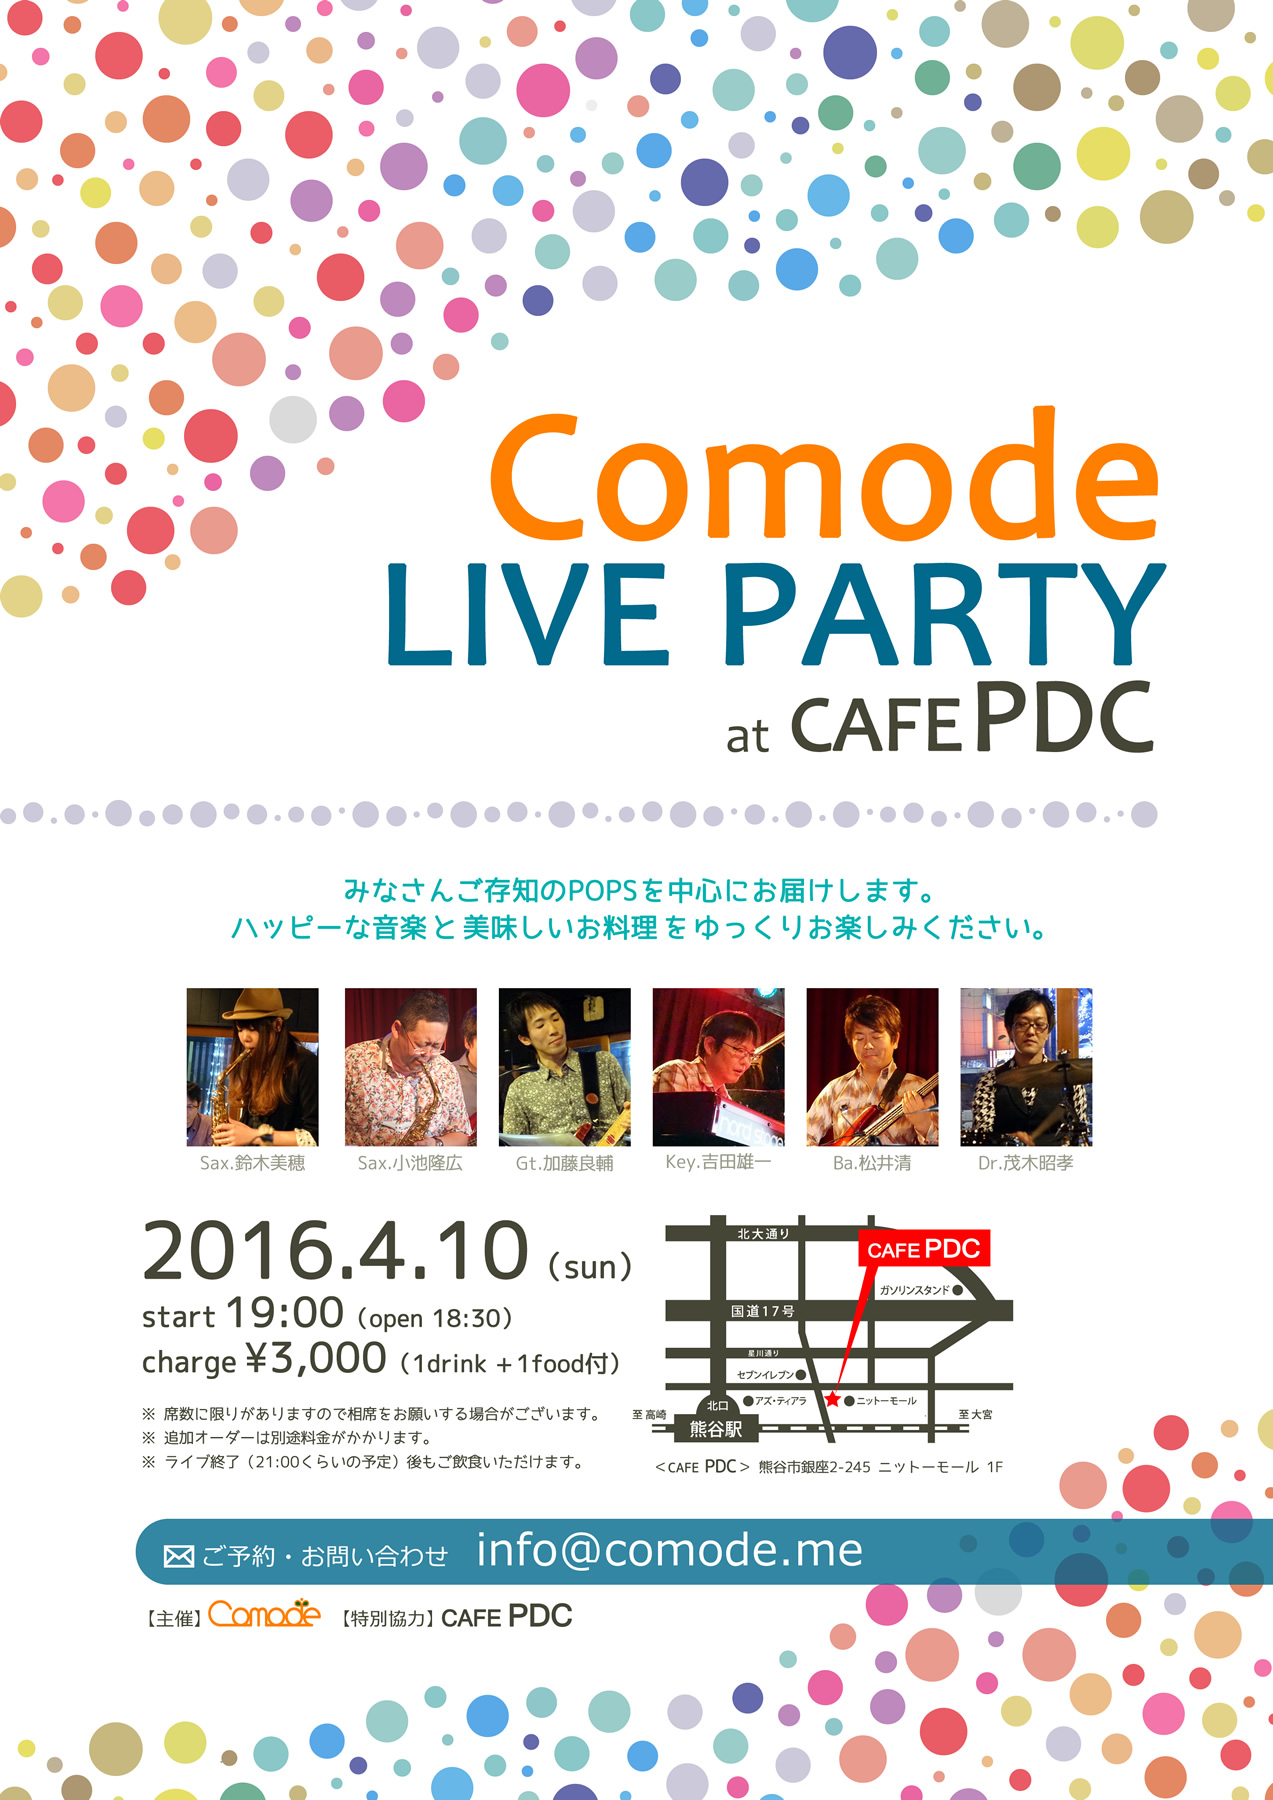 Comode ライブパーティー at CAFE PDC 2016年4月10日（日）